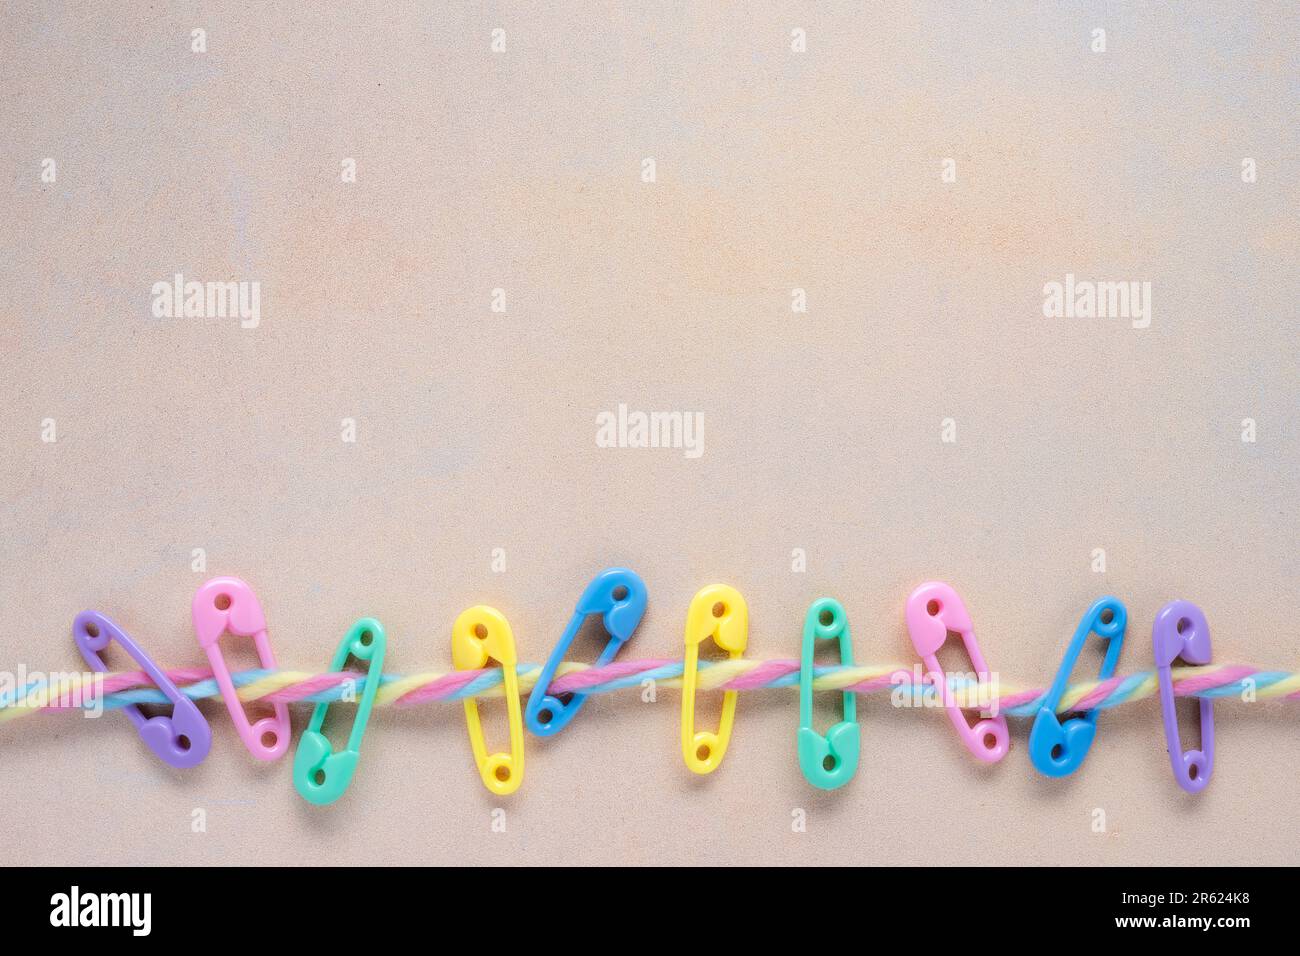 colorful baby concept flat lay with bright plastic diaper pins on a multi colored fuzzy yarn line with mottled yellow background Stock Photo